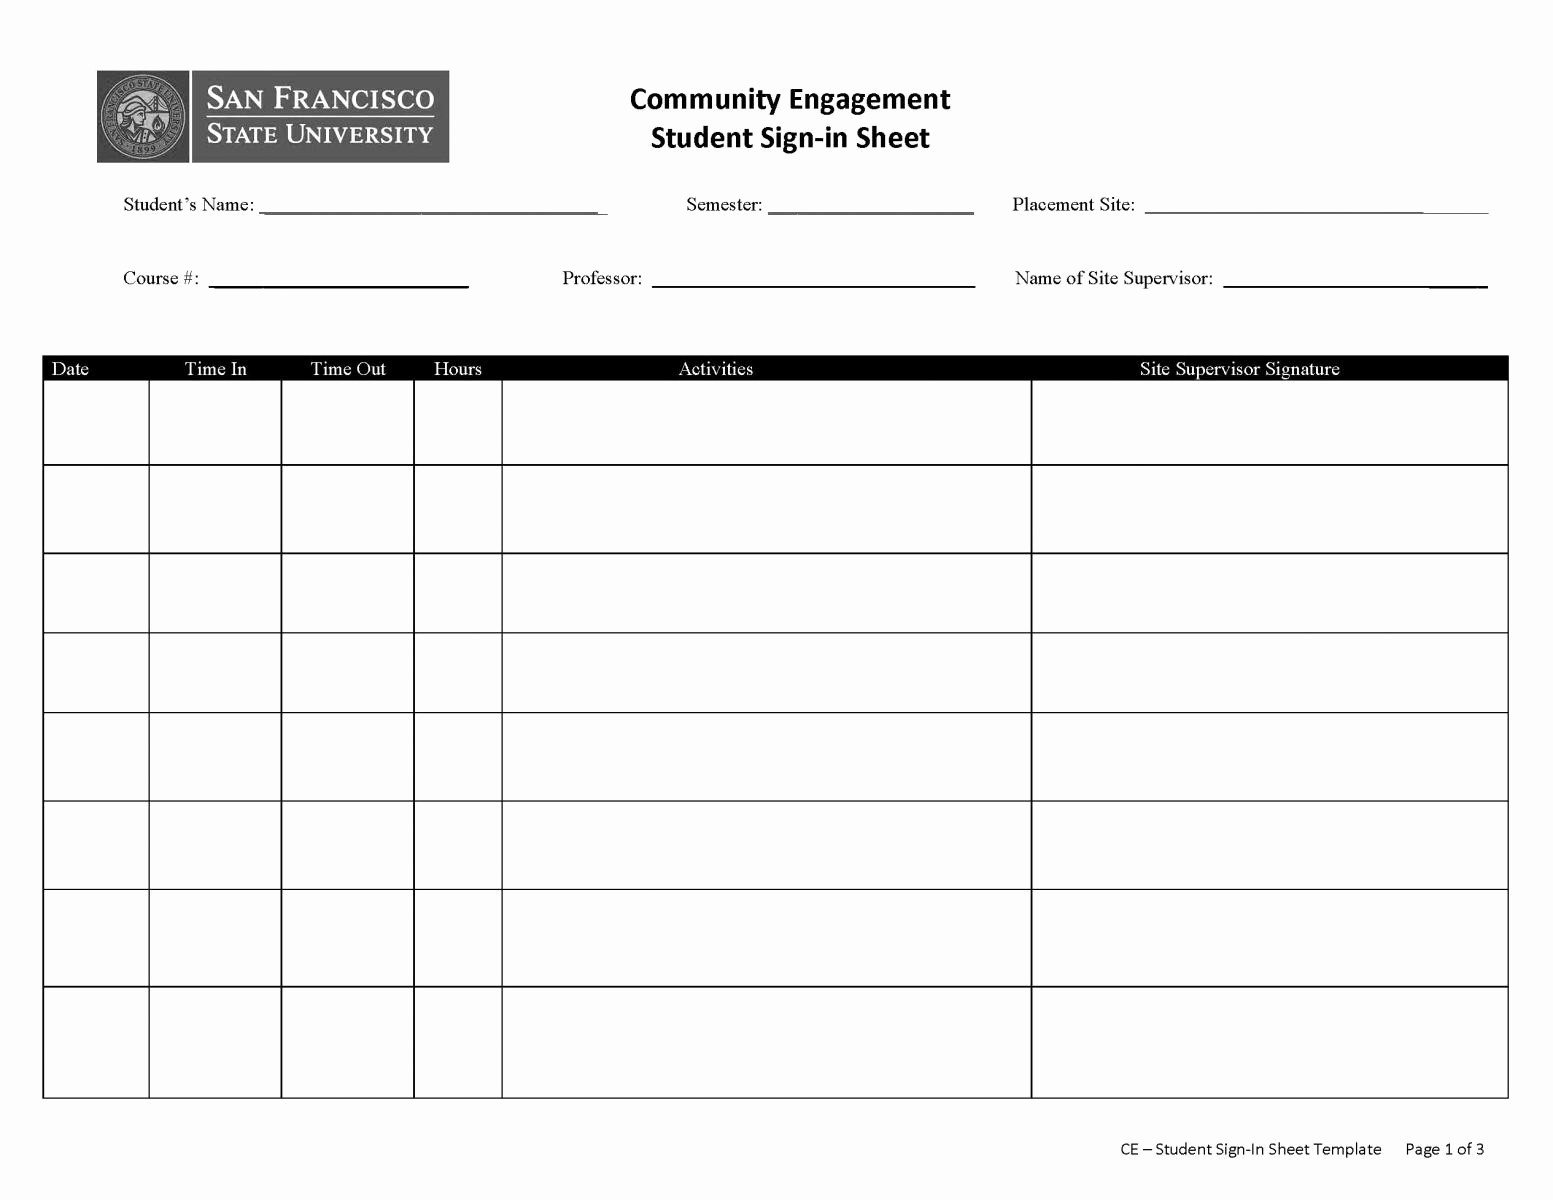 Student Sign In Sheet Template Unique Faculty &amp; Staff Resources